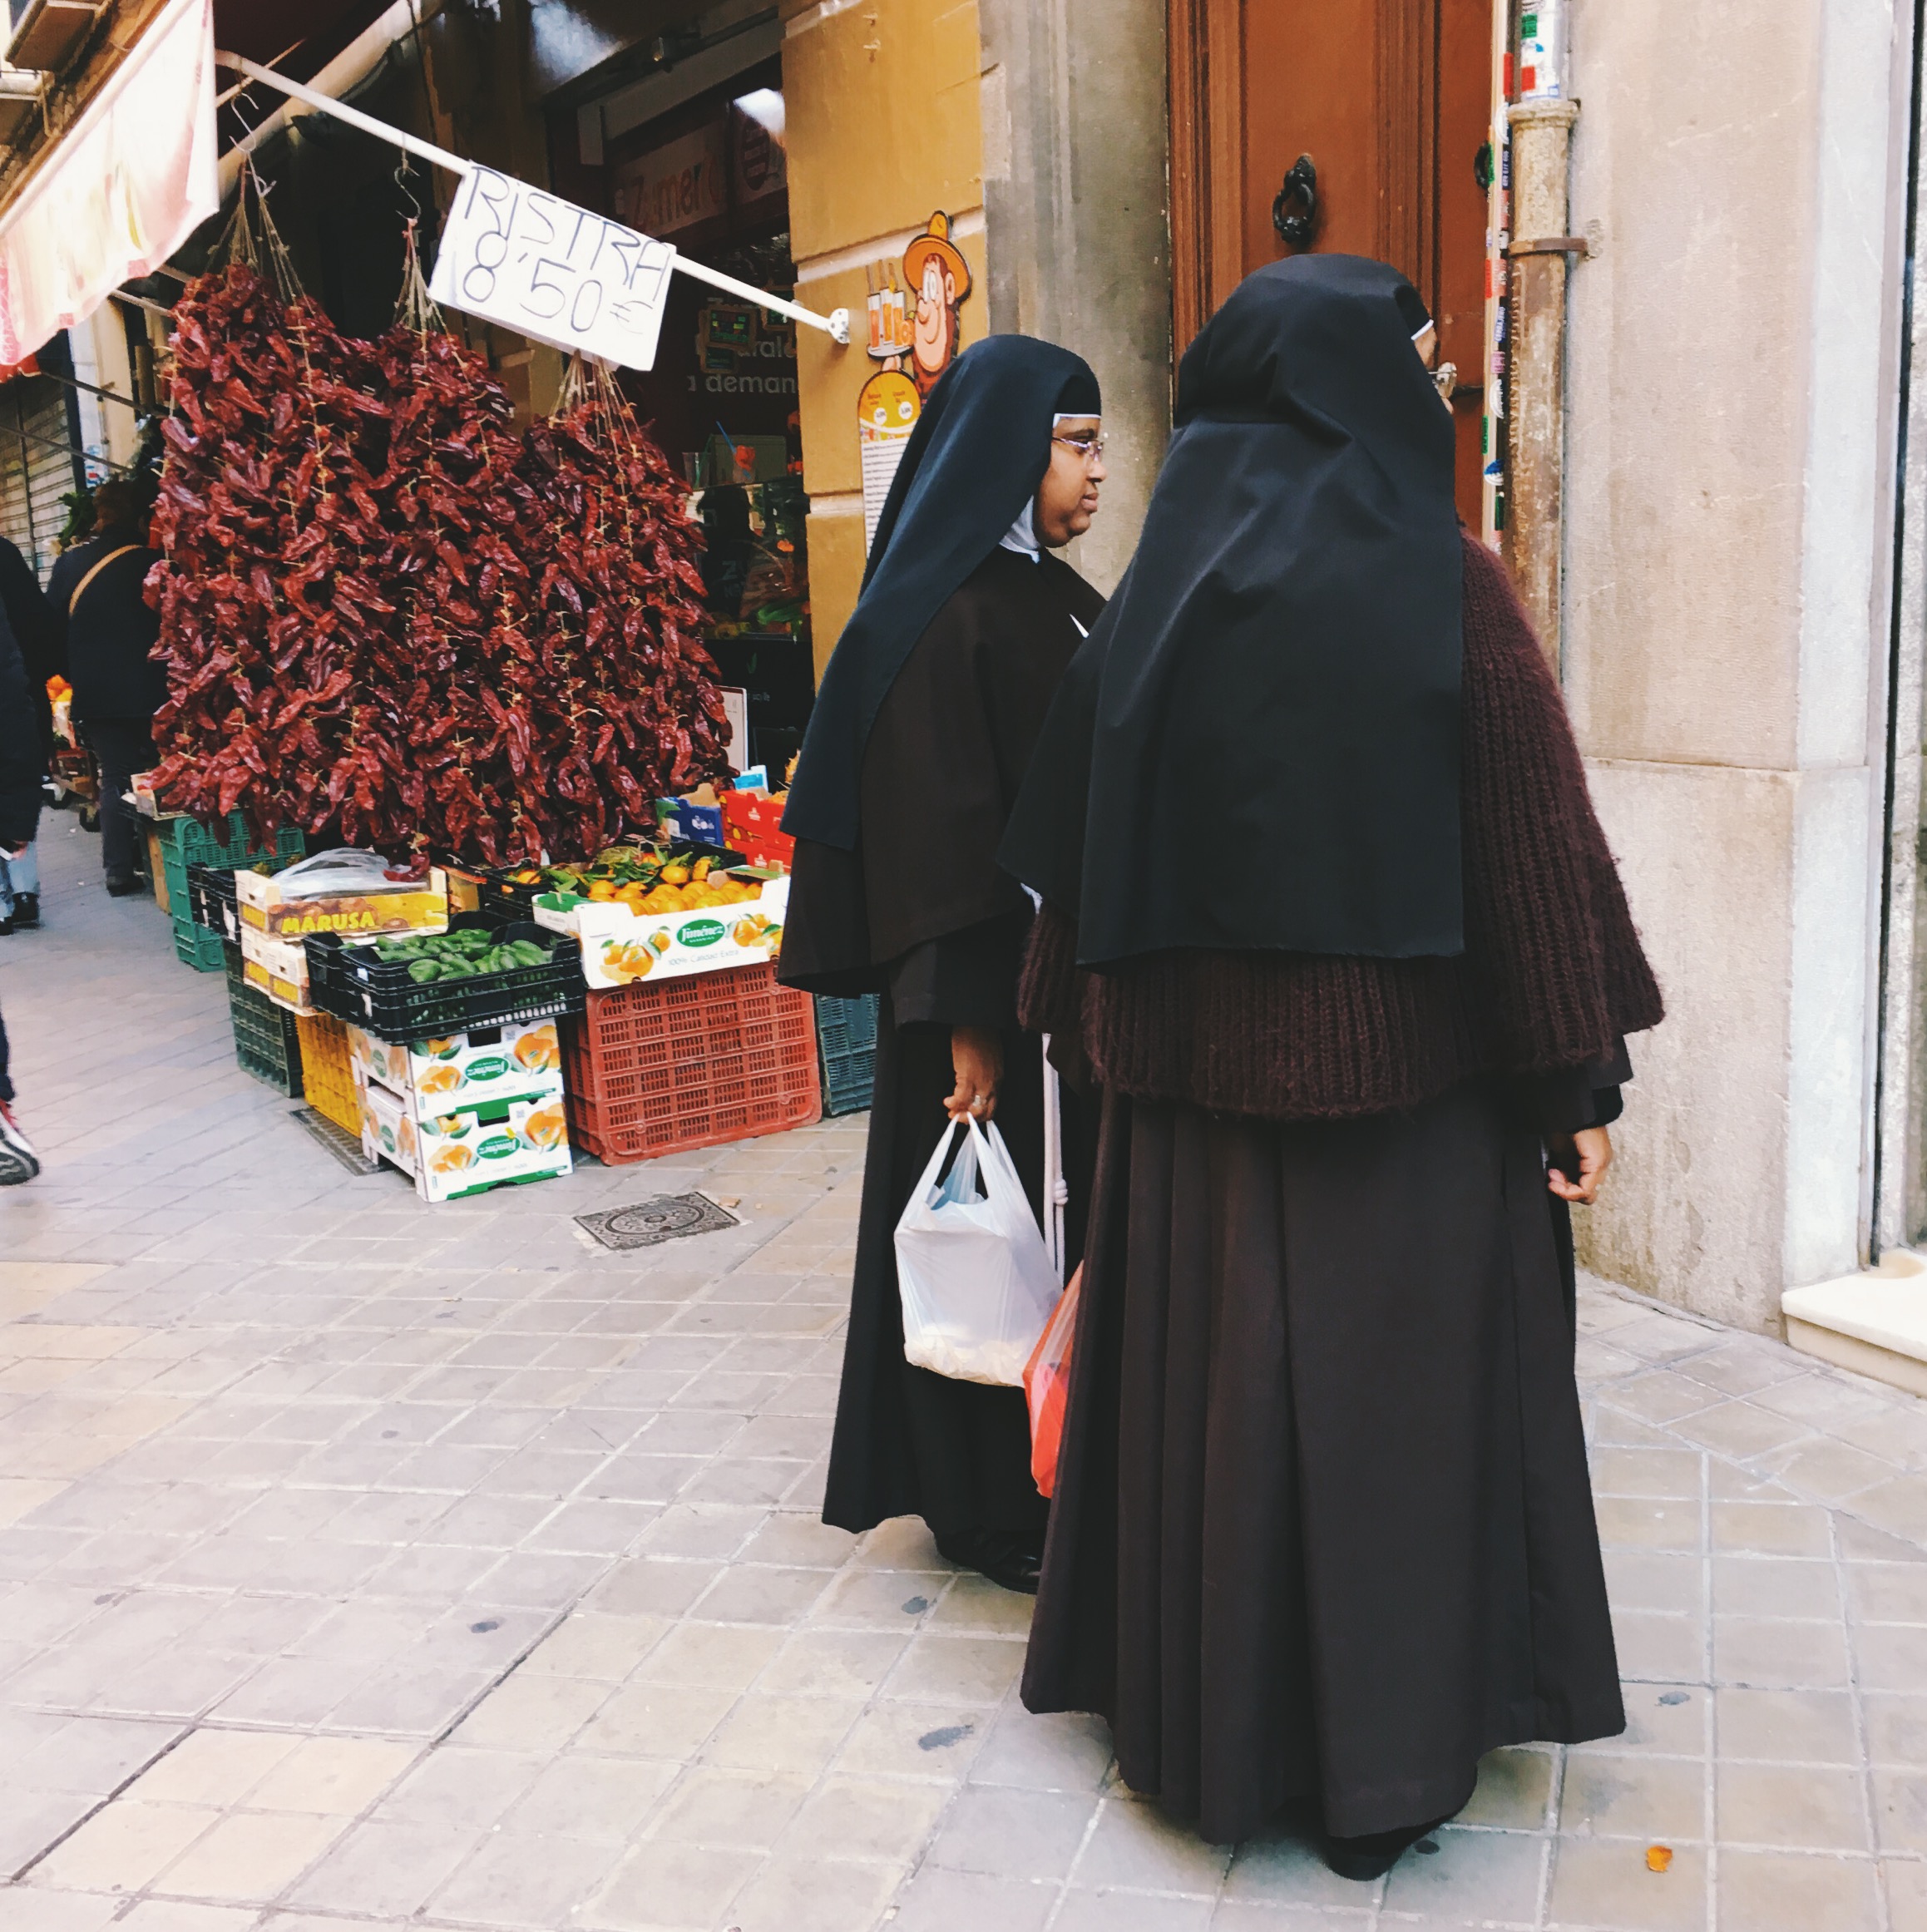 Hot peppers & nuns. 